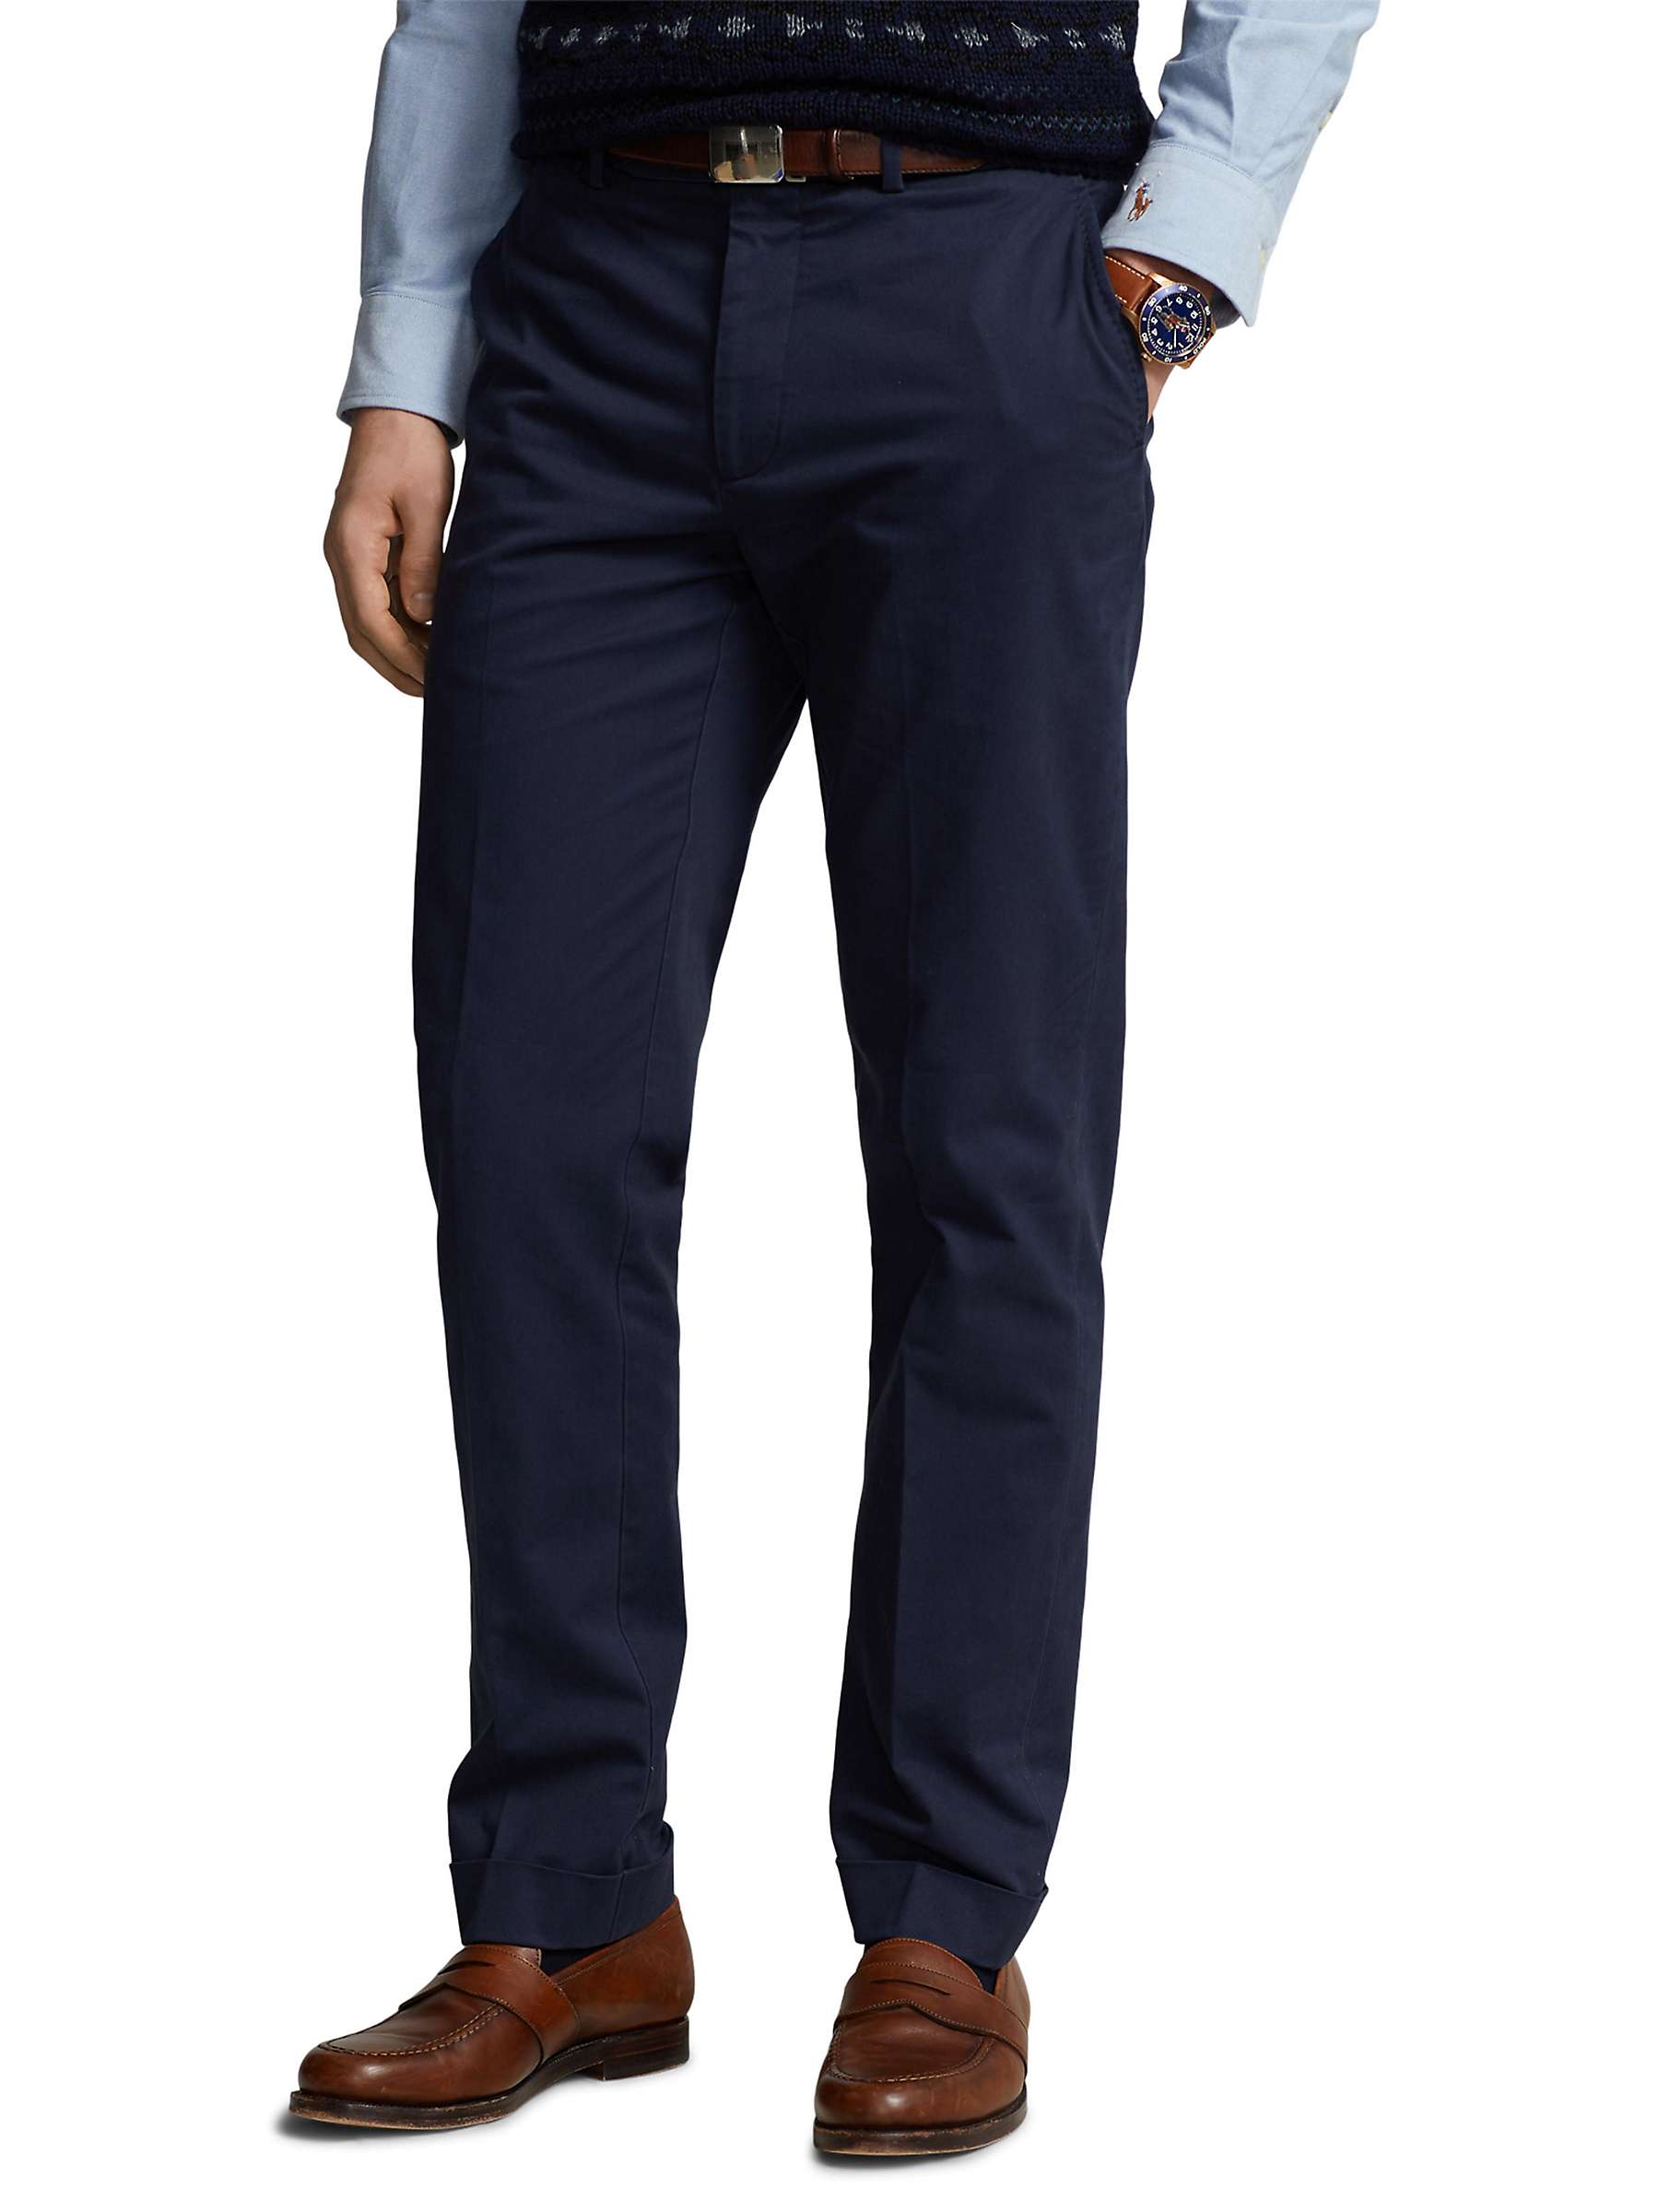 Buy Polo Ralph Lauren Tailored Fit Chinos Online at johnlewis.com